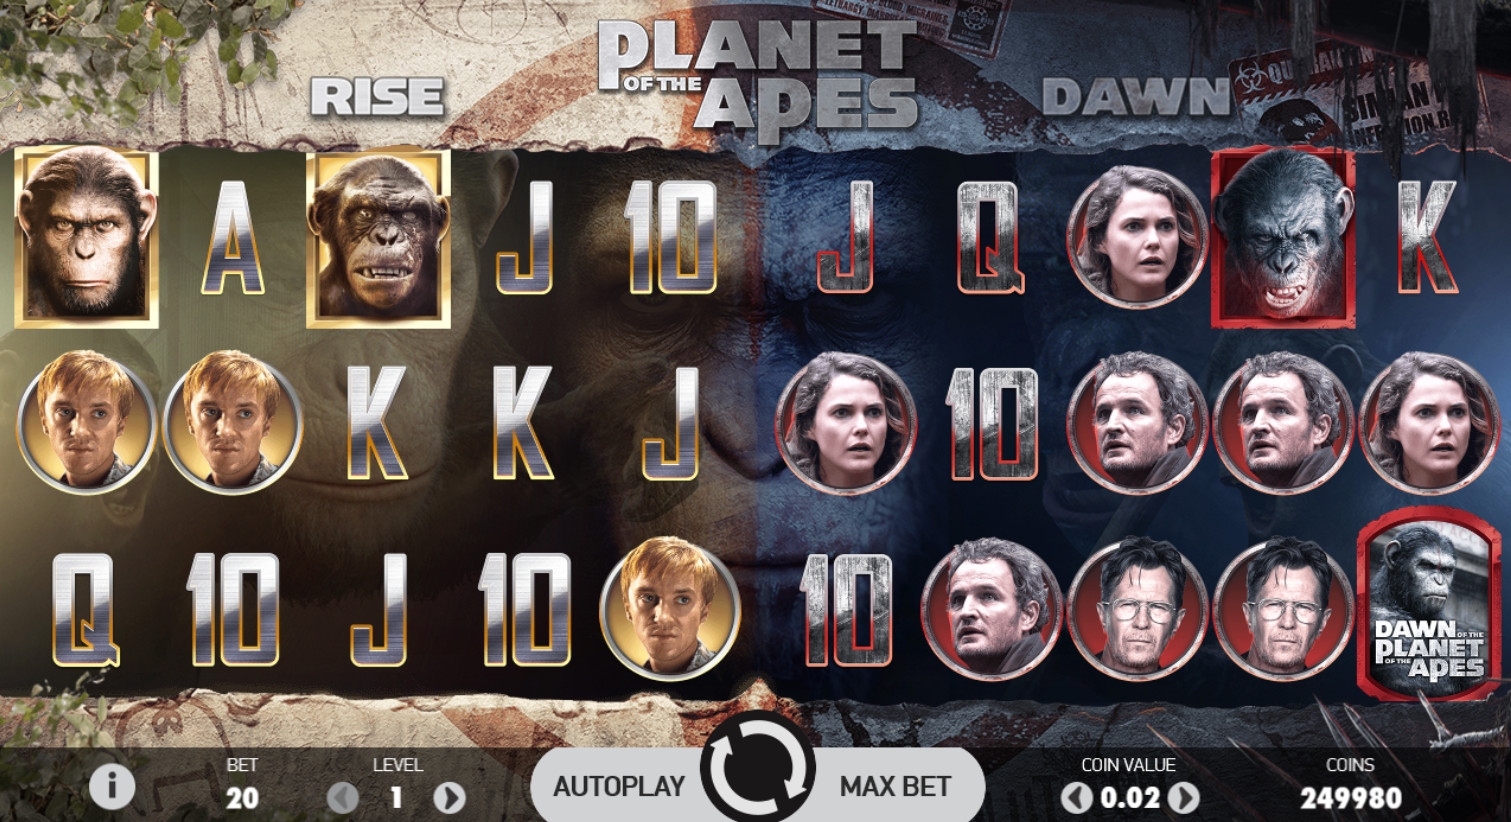 Planet of the Apes (Planet of the Apes) from category Slots